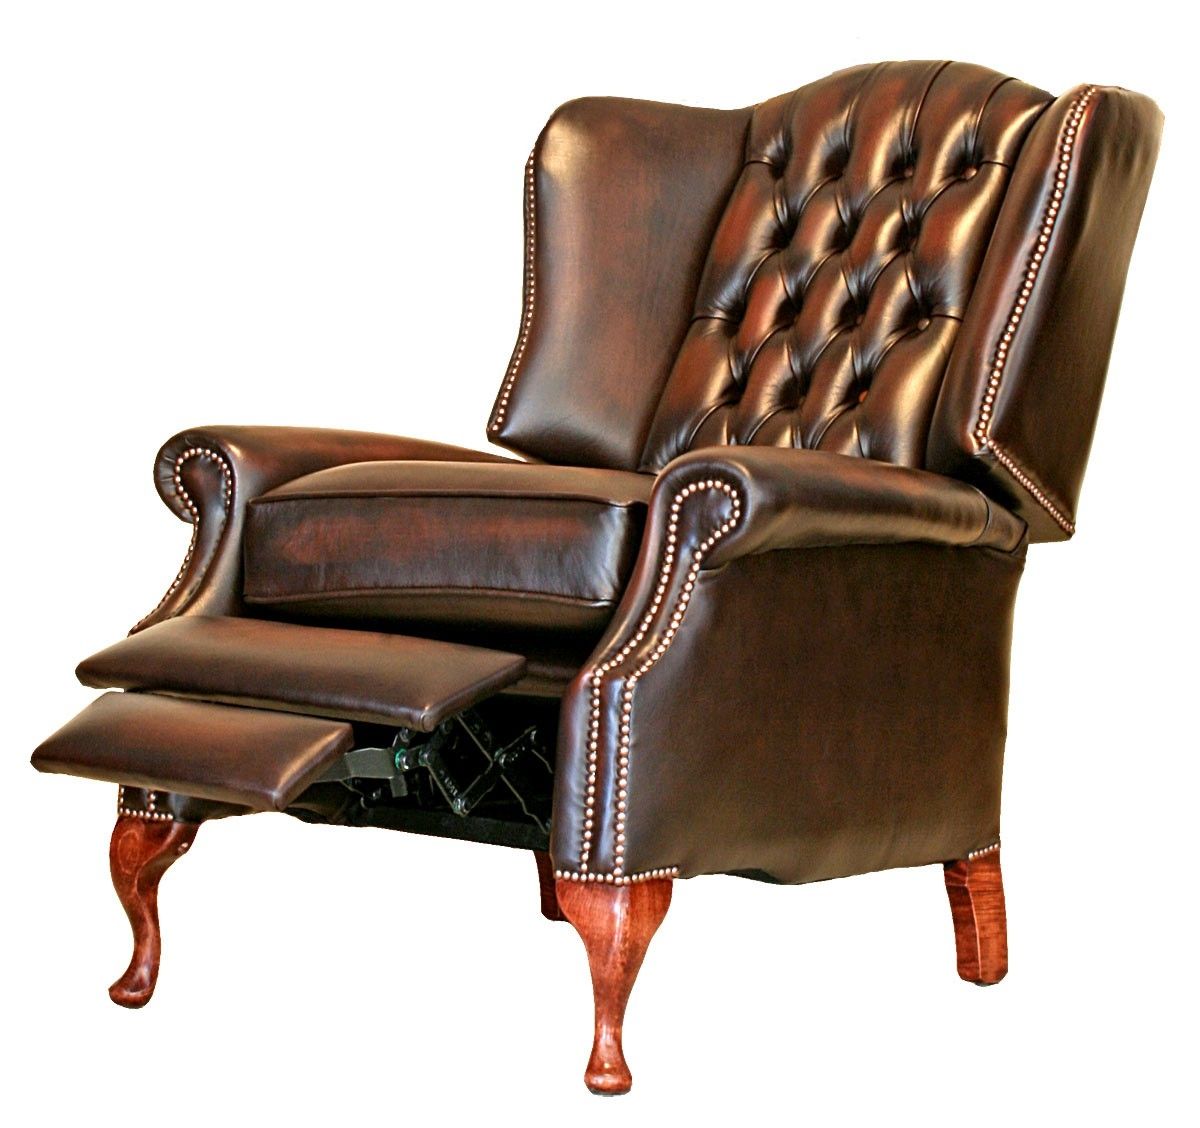 Chesterfield Recliner Chair Furnitures Online Usa Intended For Chesterfield Recliners (View 2 of 15)